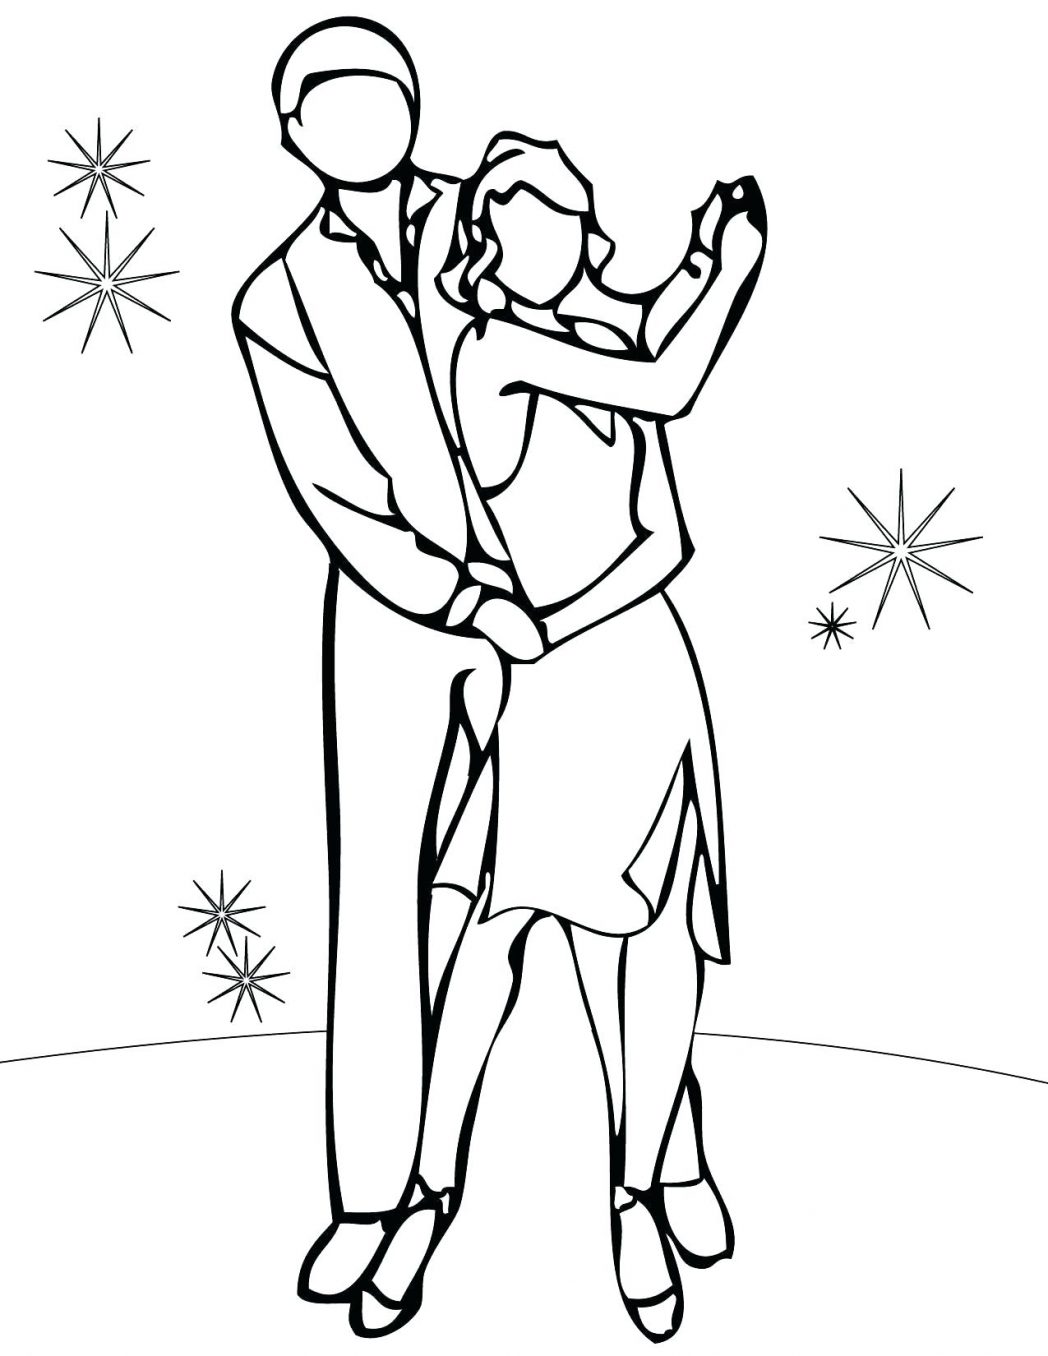 Coloring Book : Marvelous Dance Coloring Pages Photo Ideas ...